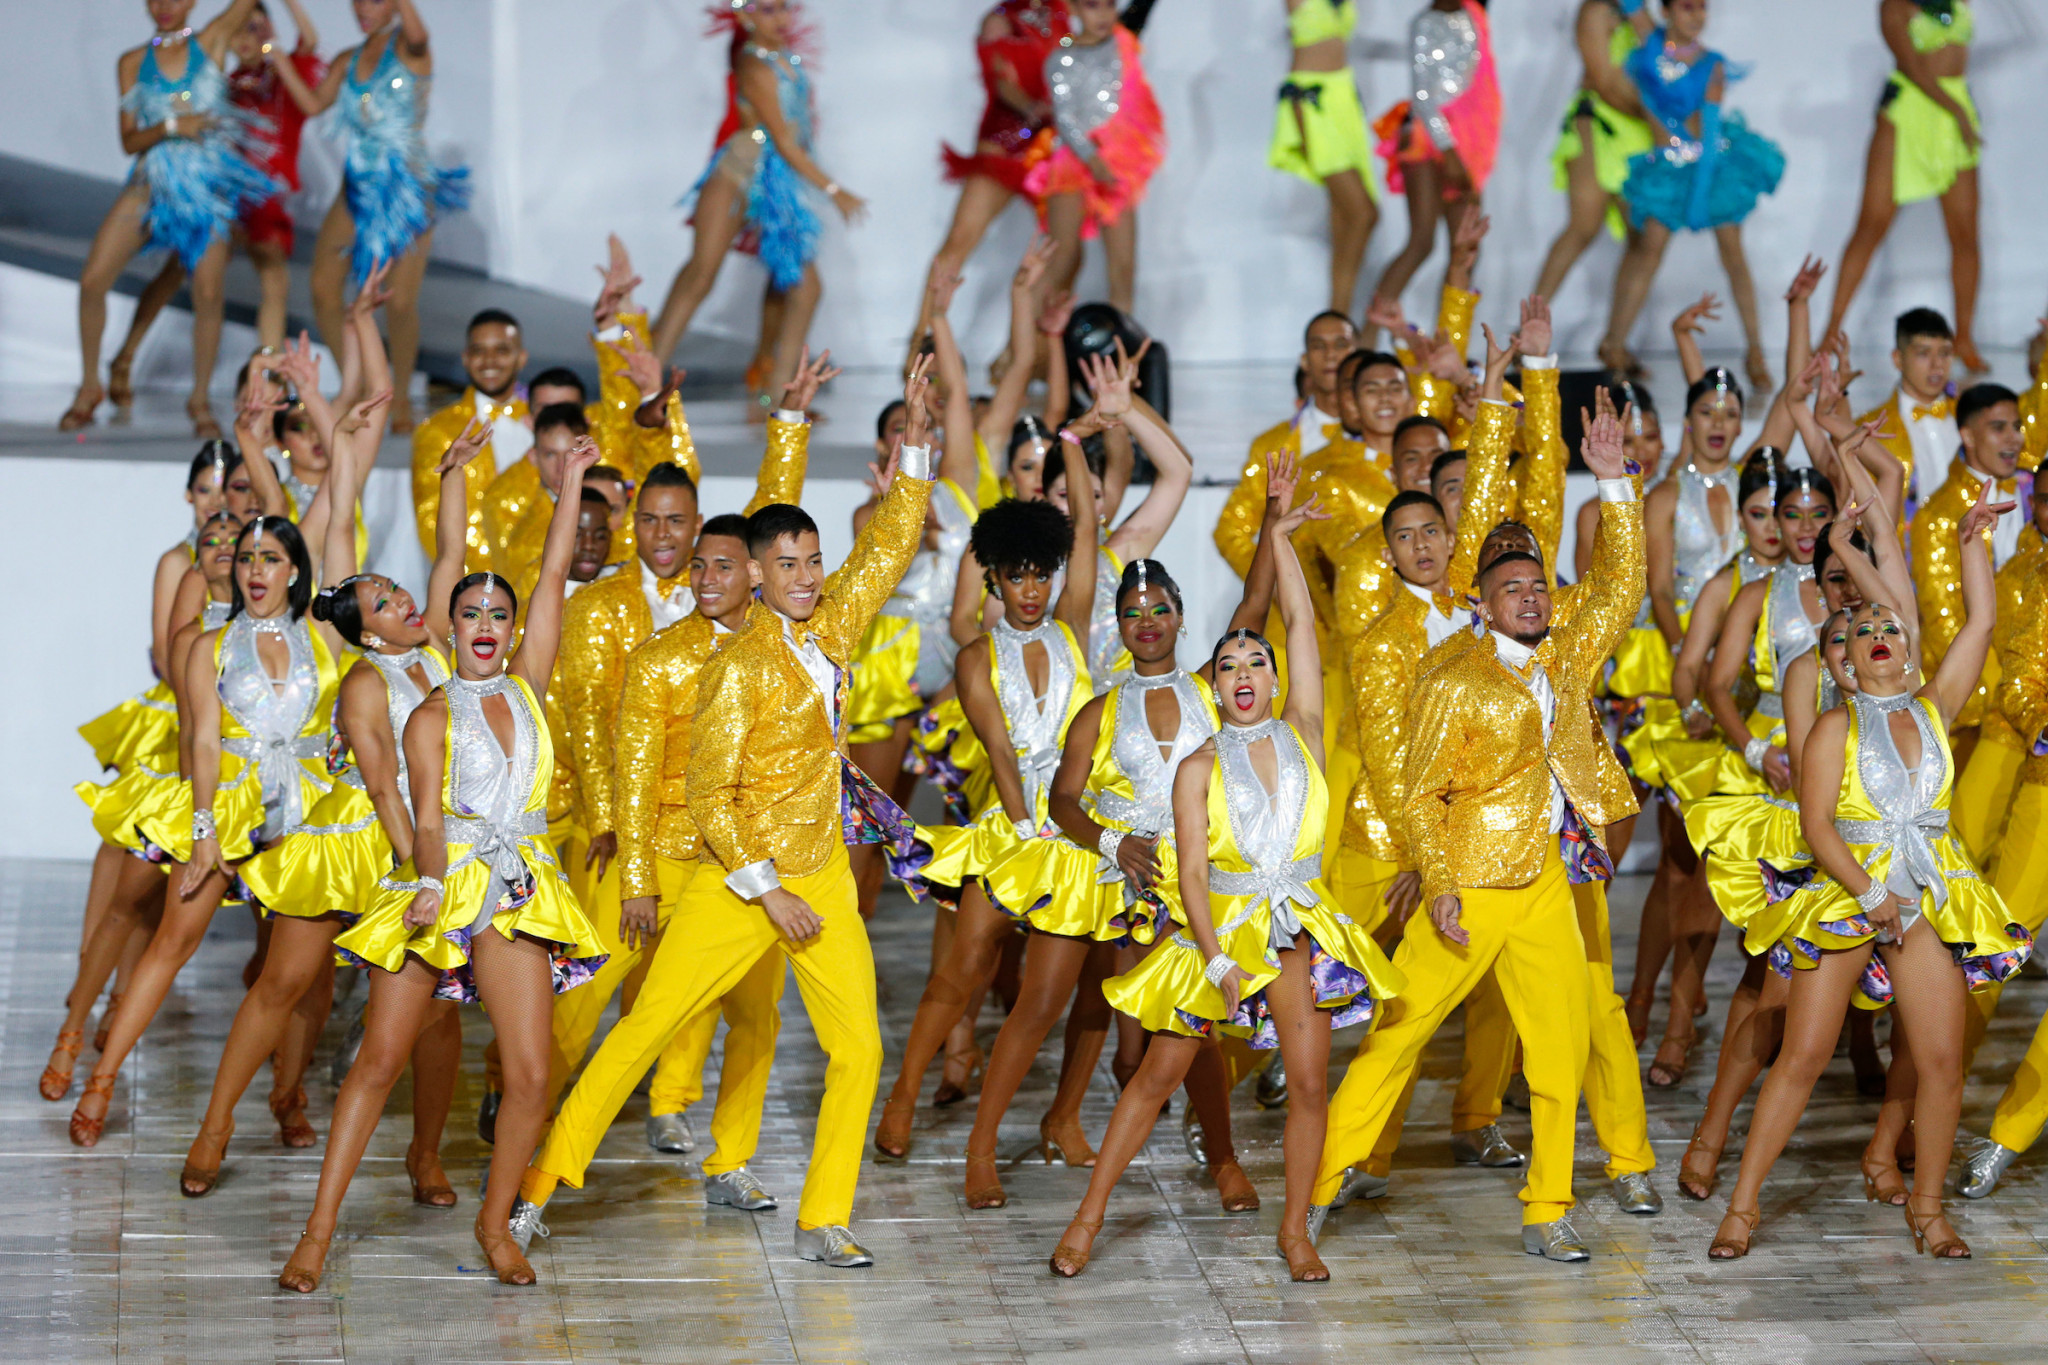 Salsa was a key feature of the Junior Pan American Games Opening Ceremony in Cali ©Agencia.XpressMedia